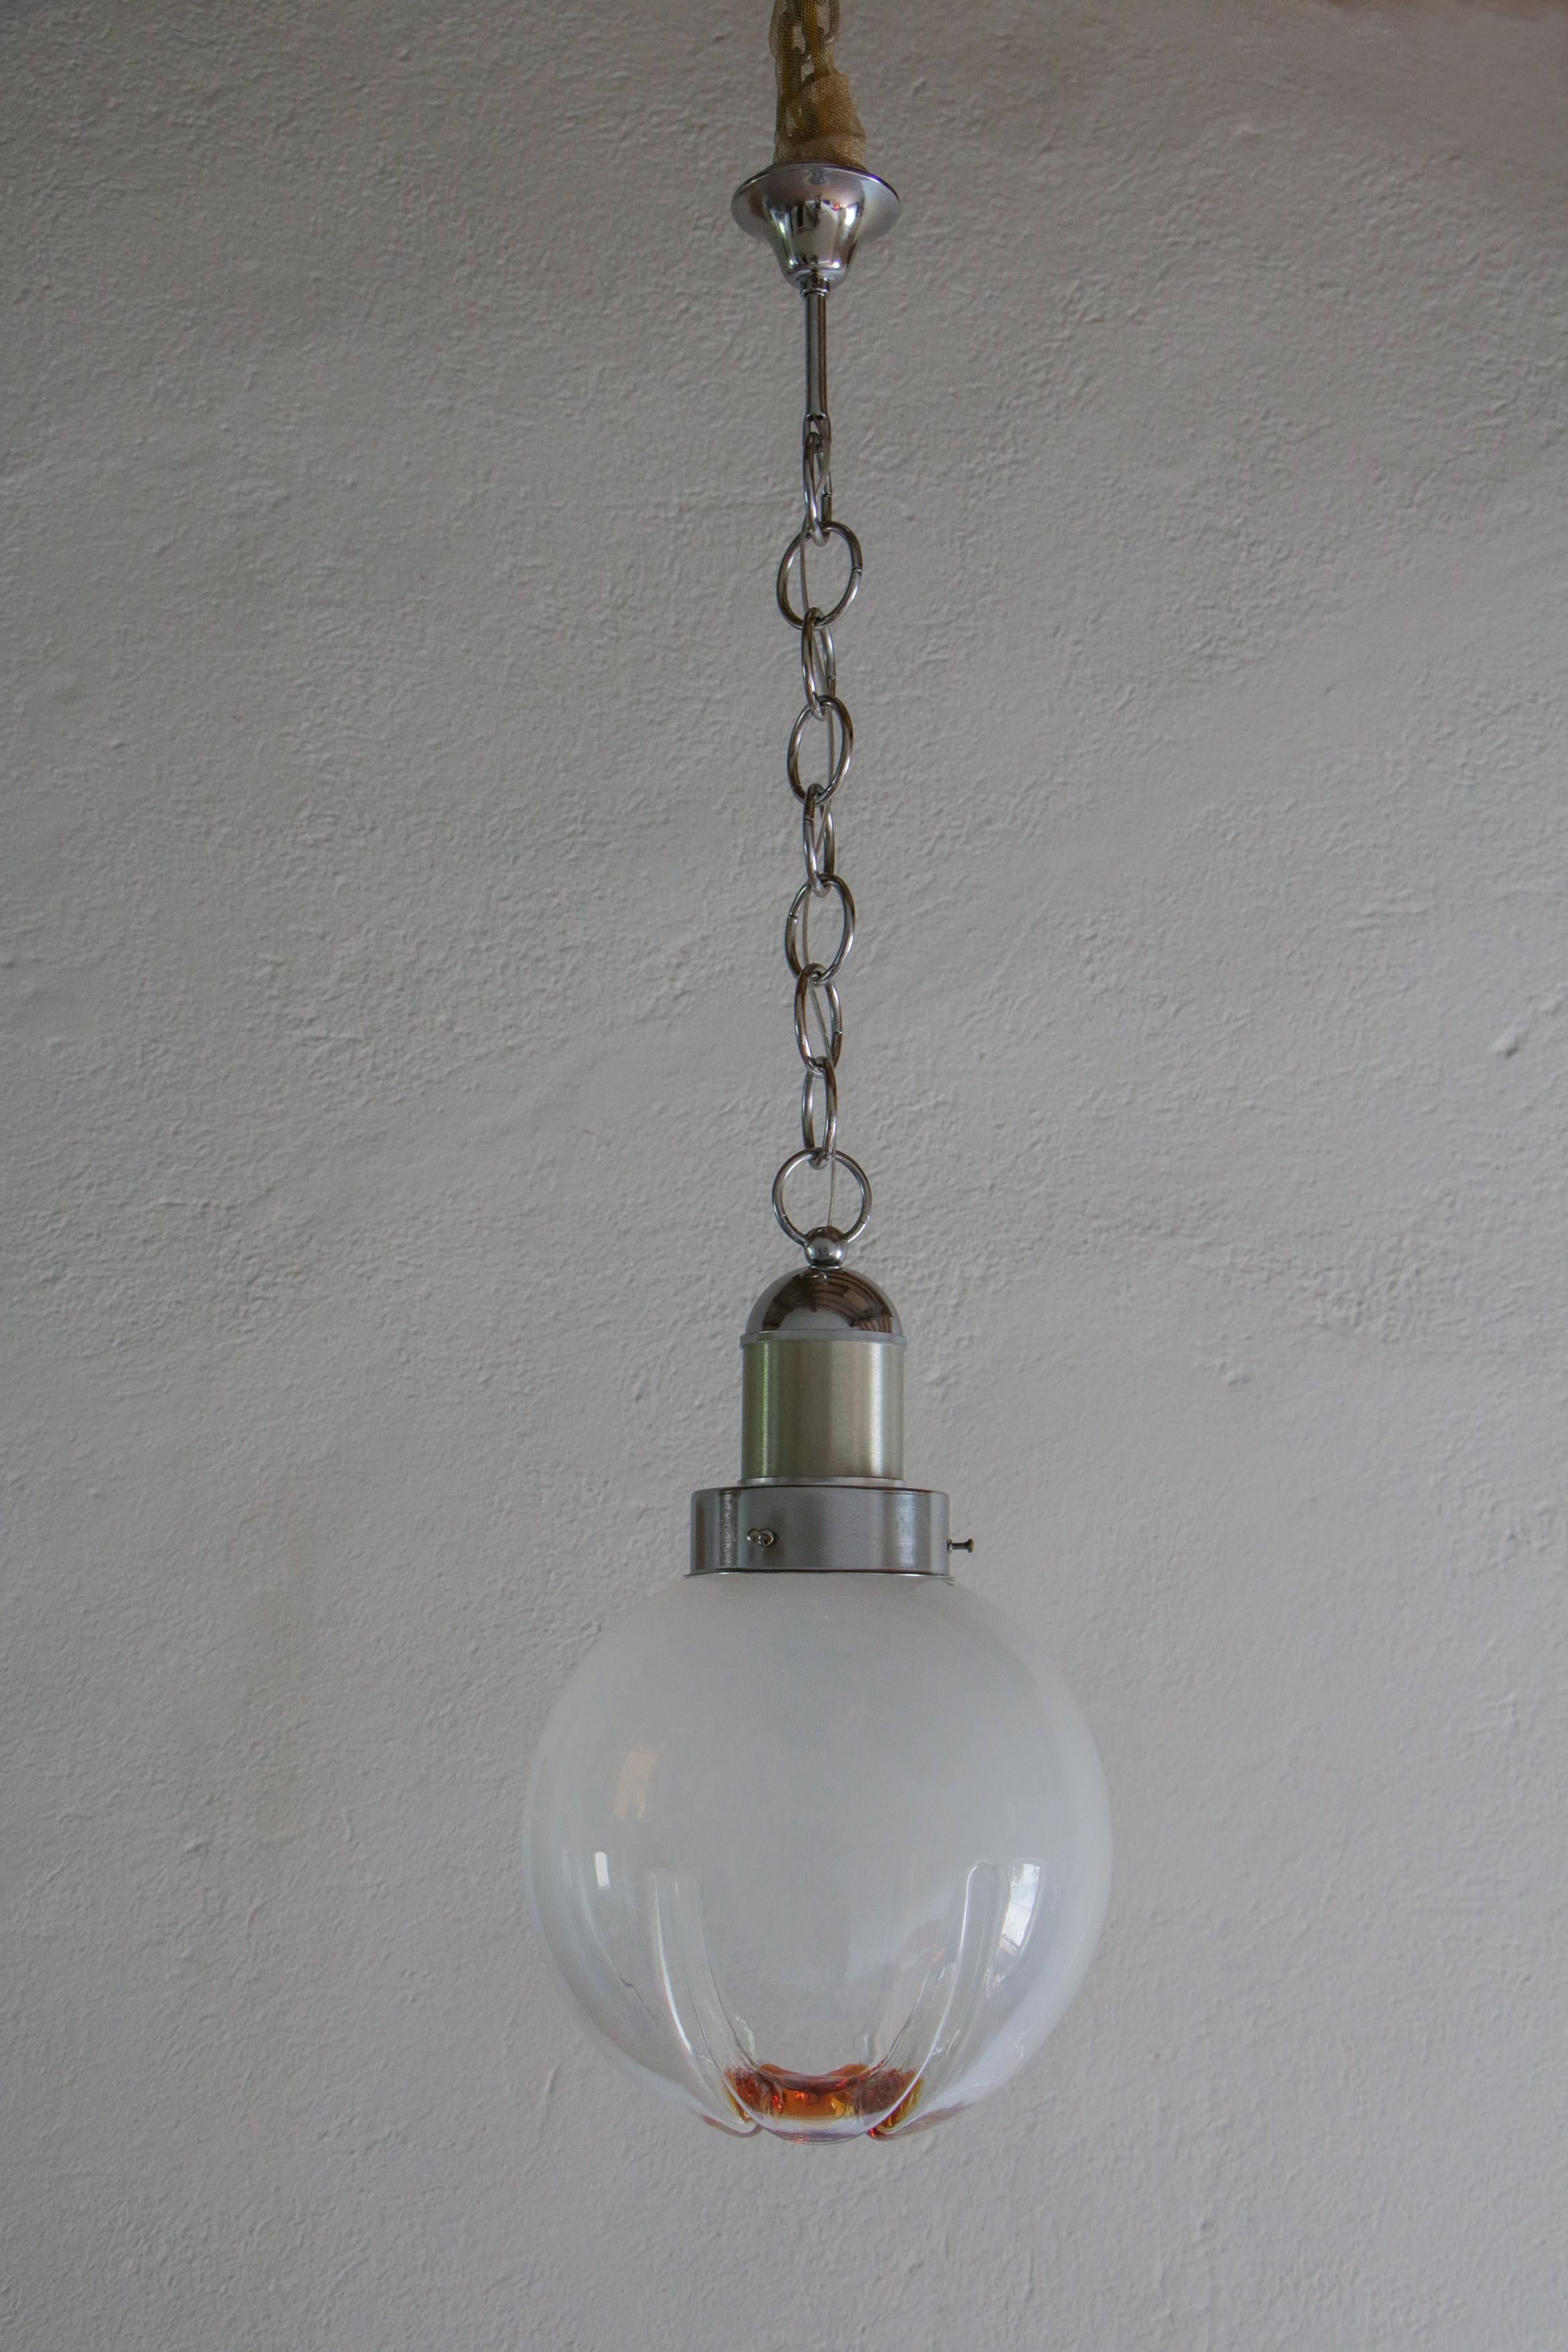 Italian space-age ball pendant lamp in smoked glass with a touch of orange, attributed to Mezzega, from the 1970s.
The structure and the pendant chain are in chromium steel. The blown smoked glass, apparently, is divided into six parts. A